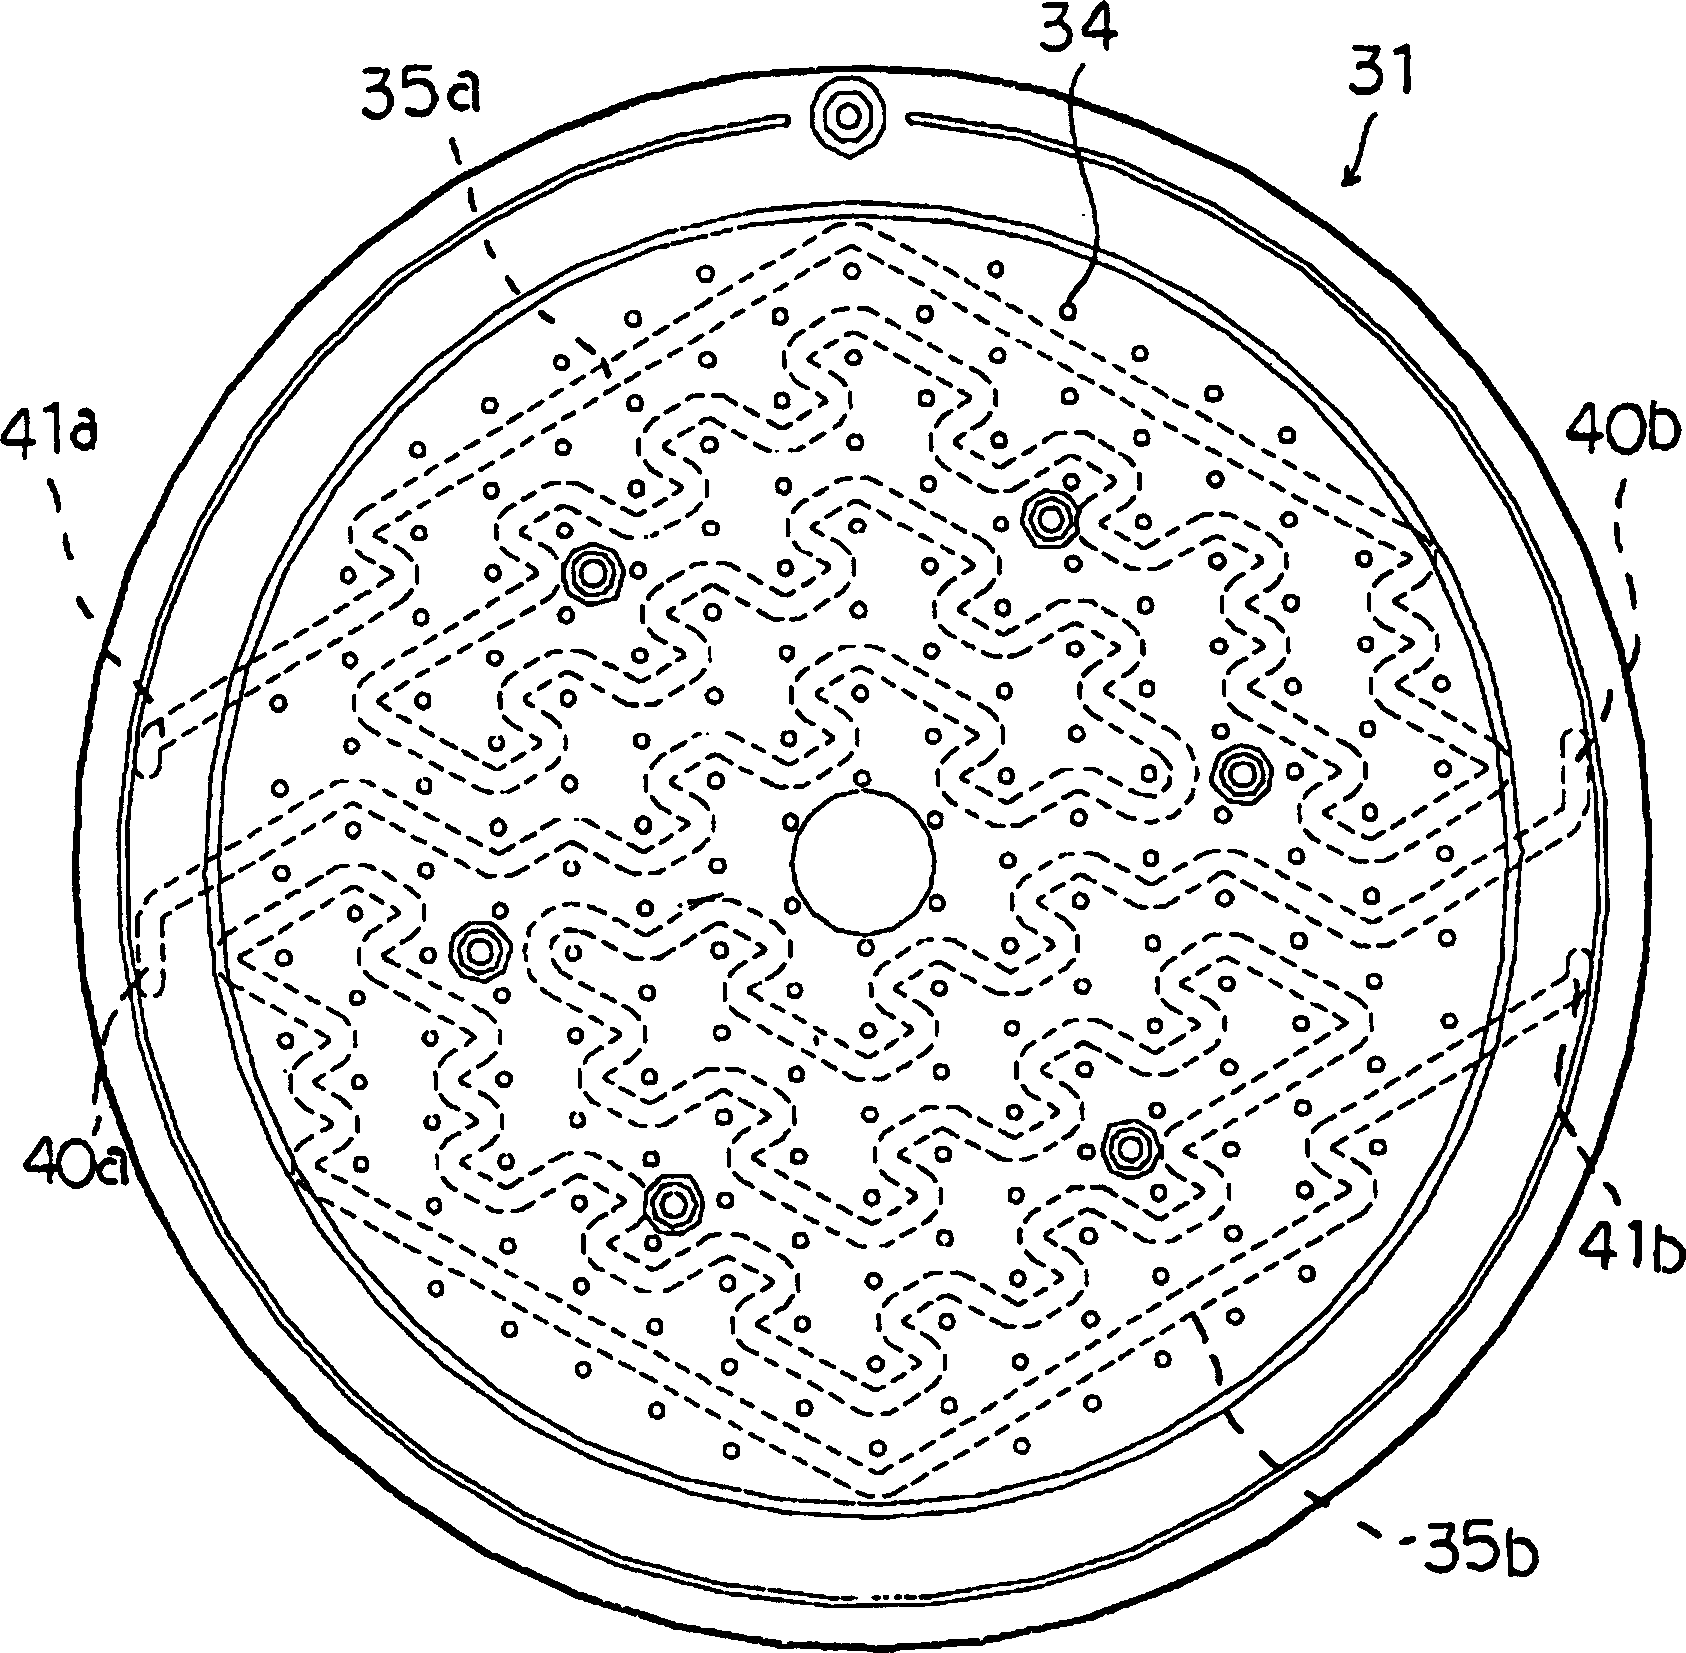 Upper electrode and plasma processing device